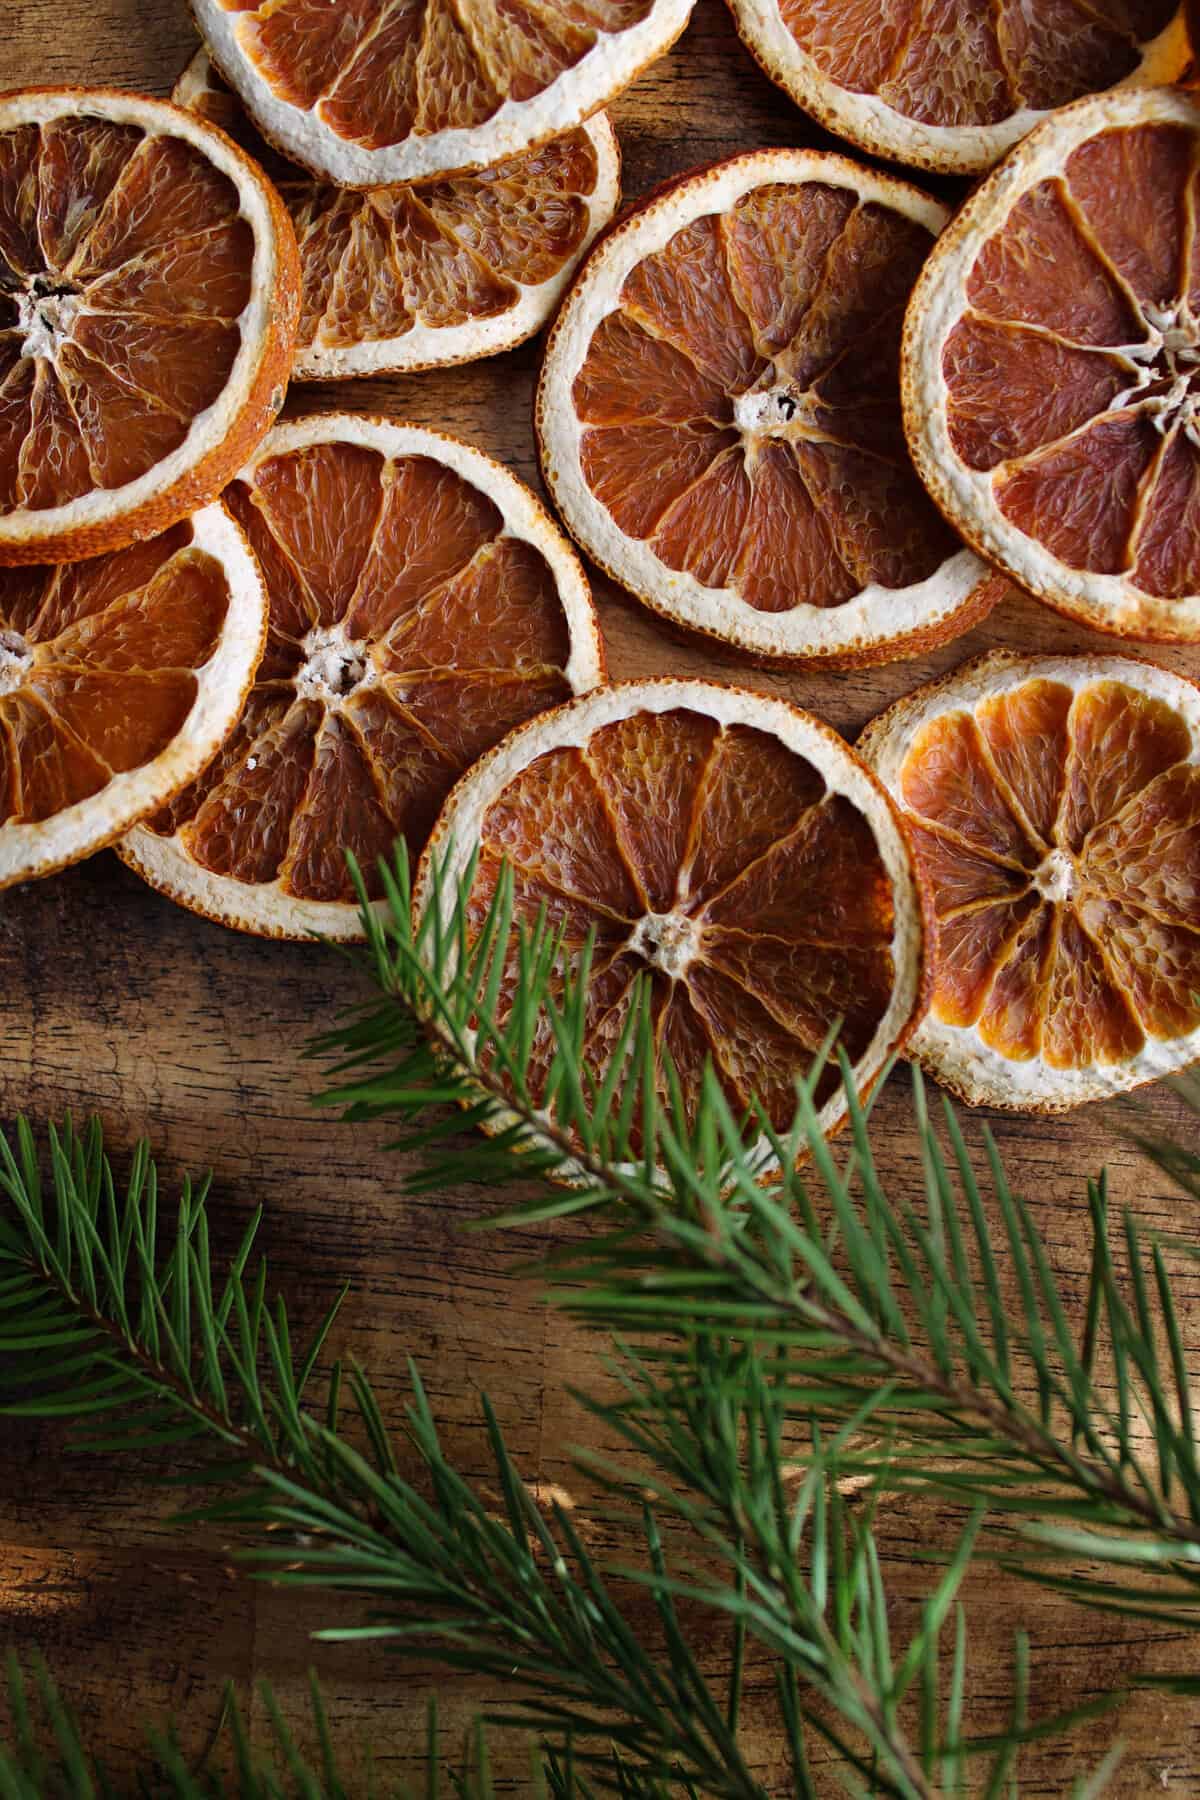 orange slices on the table next to pine branches